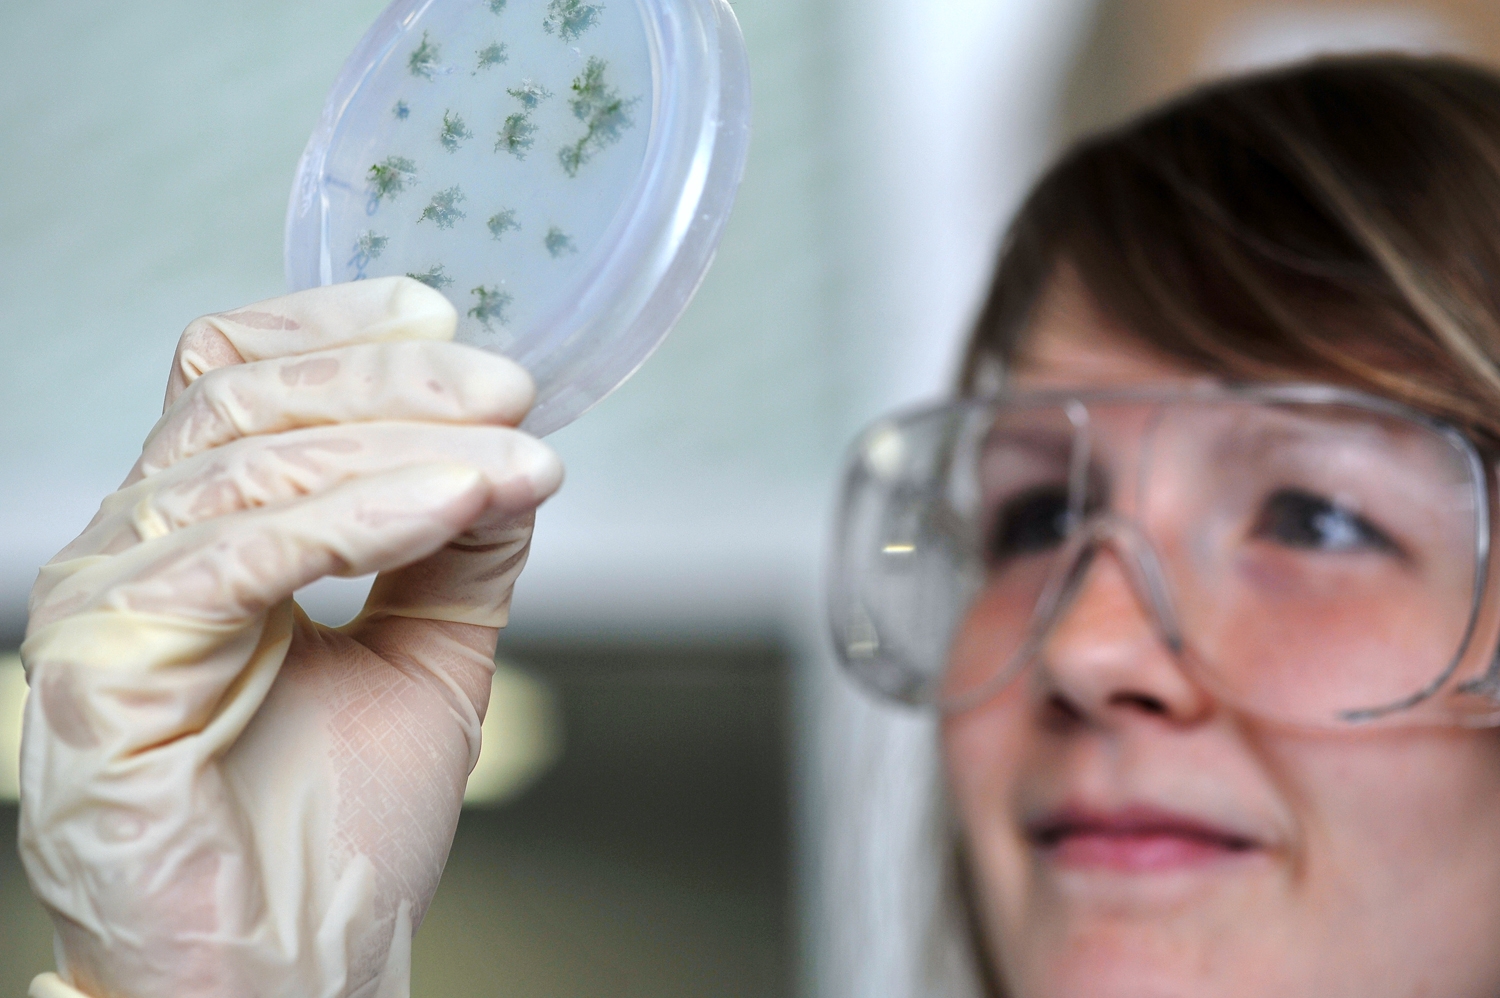 The photo shows the face of a young woman looking at a Petridish with several green moss plants.